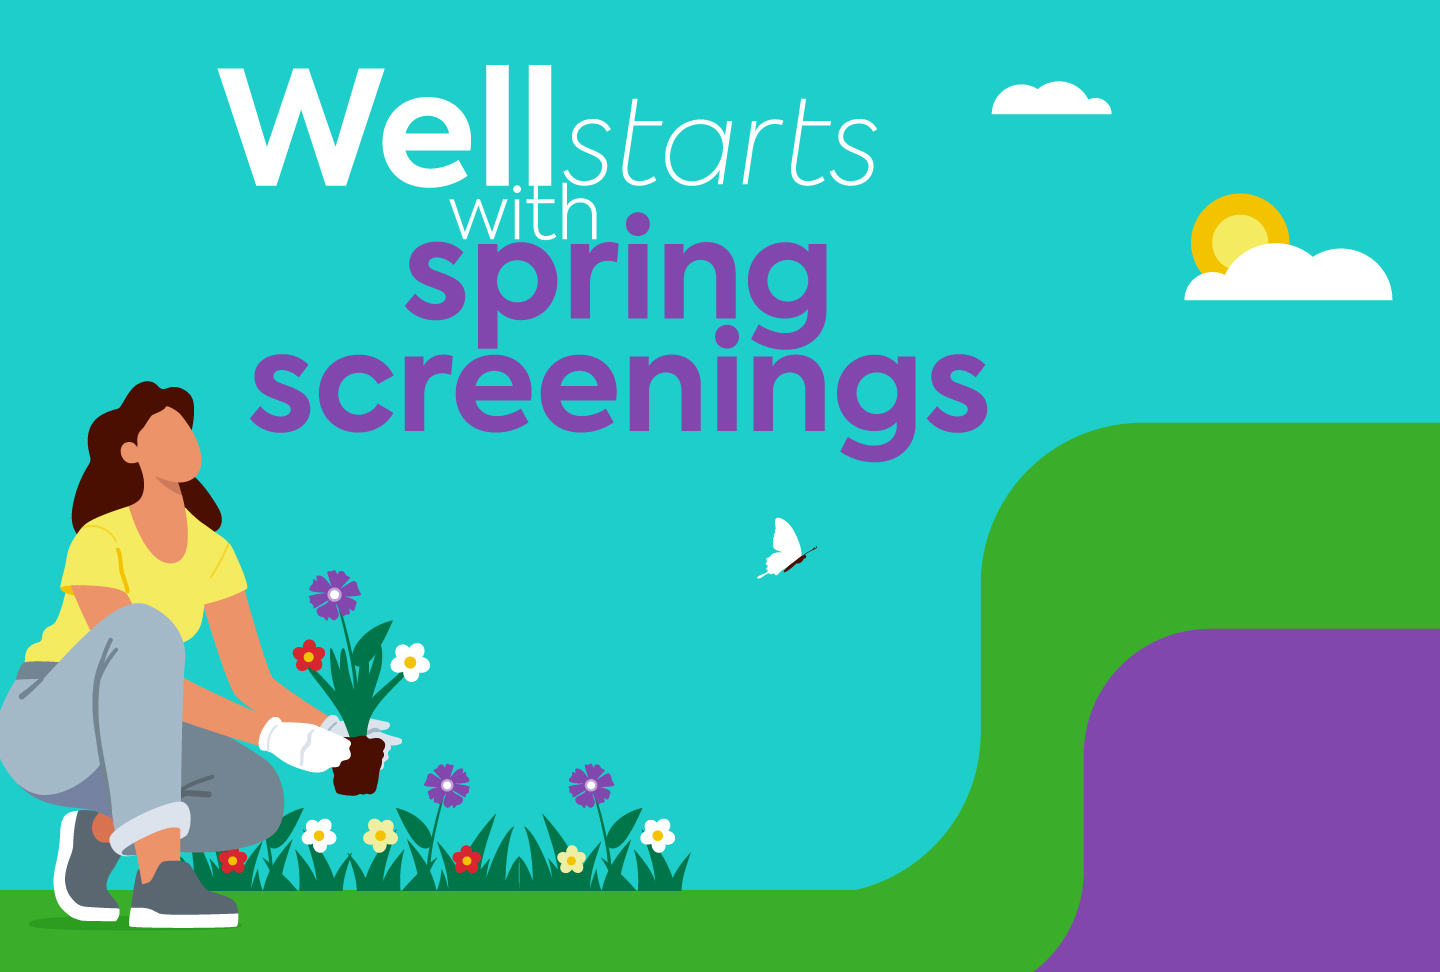 Well Starts with Spring Screenings Image